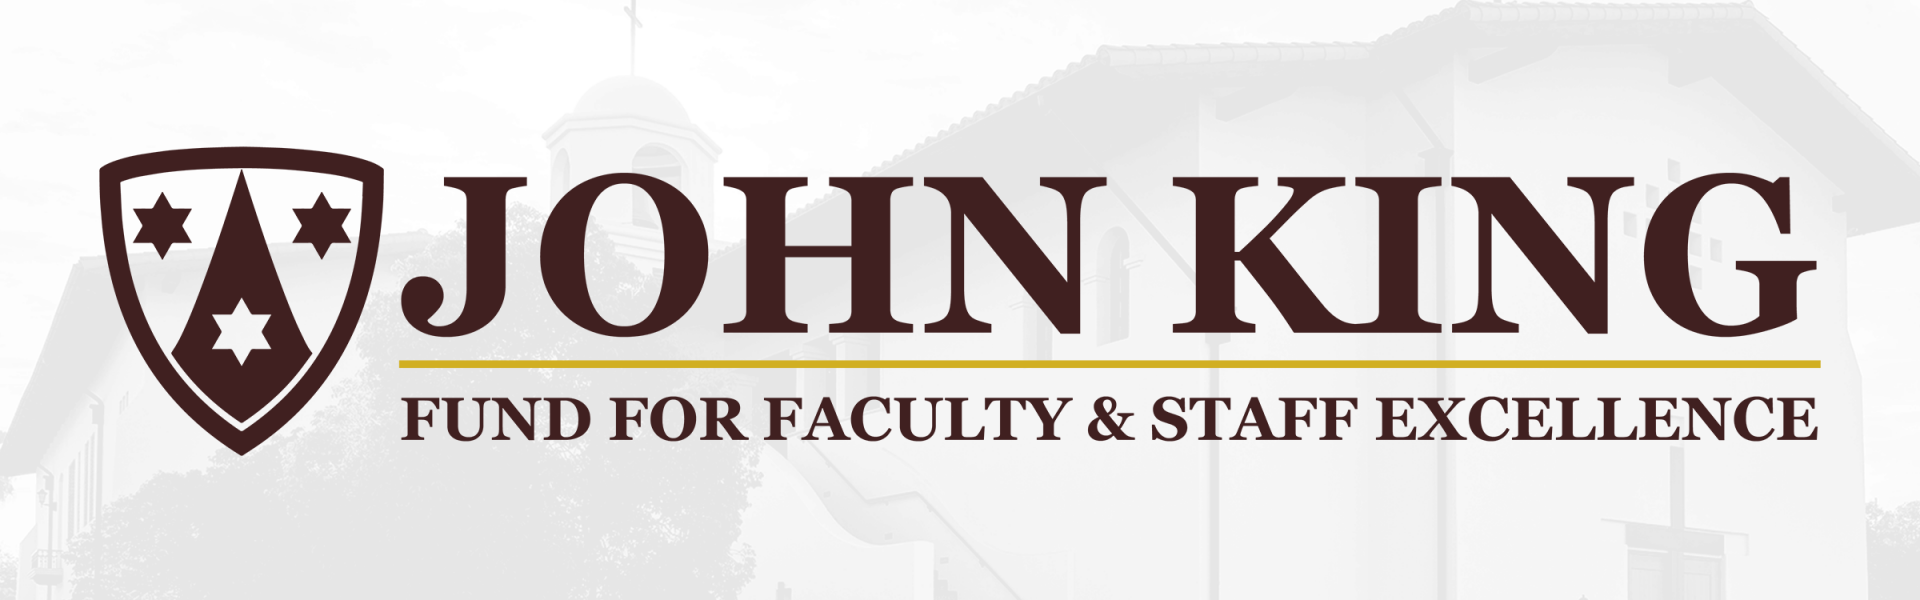 John King Fund for Faculty & Staff Excellence banner